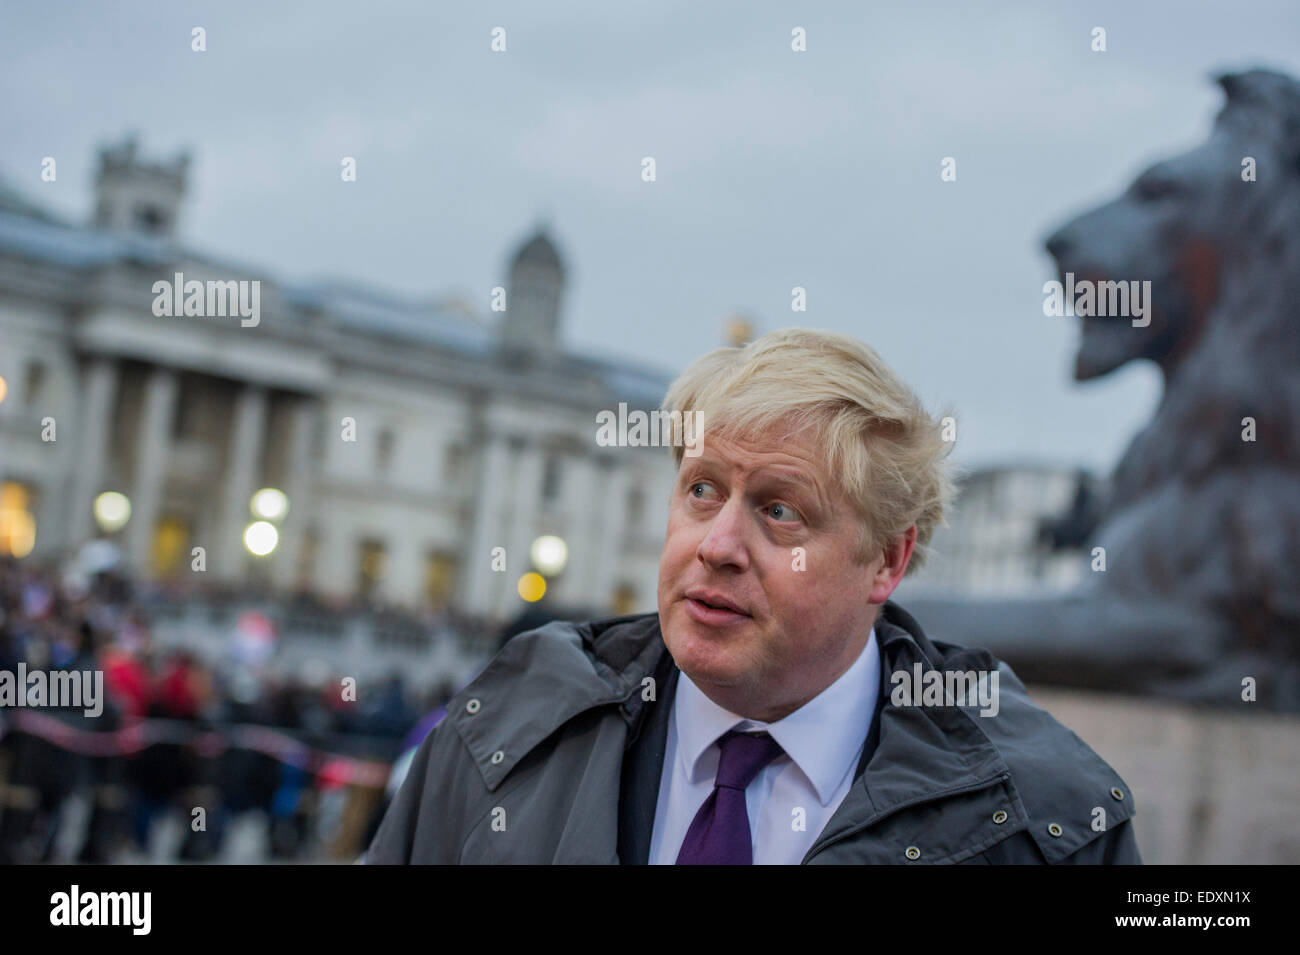 London, UK. 11th Jan, 2015. Nick Clegg and Boris Johnson (pictured)attend to show solidarity. Je suis Charlie/I am Charlie - A largely silent (with the occasional rendition of the Marseilaise)gathering in solidarity with the march in Paris today.  Trafalgar Square, London, UK. Credit:  Guy Bell/Alamy Live News Stock Photo